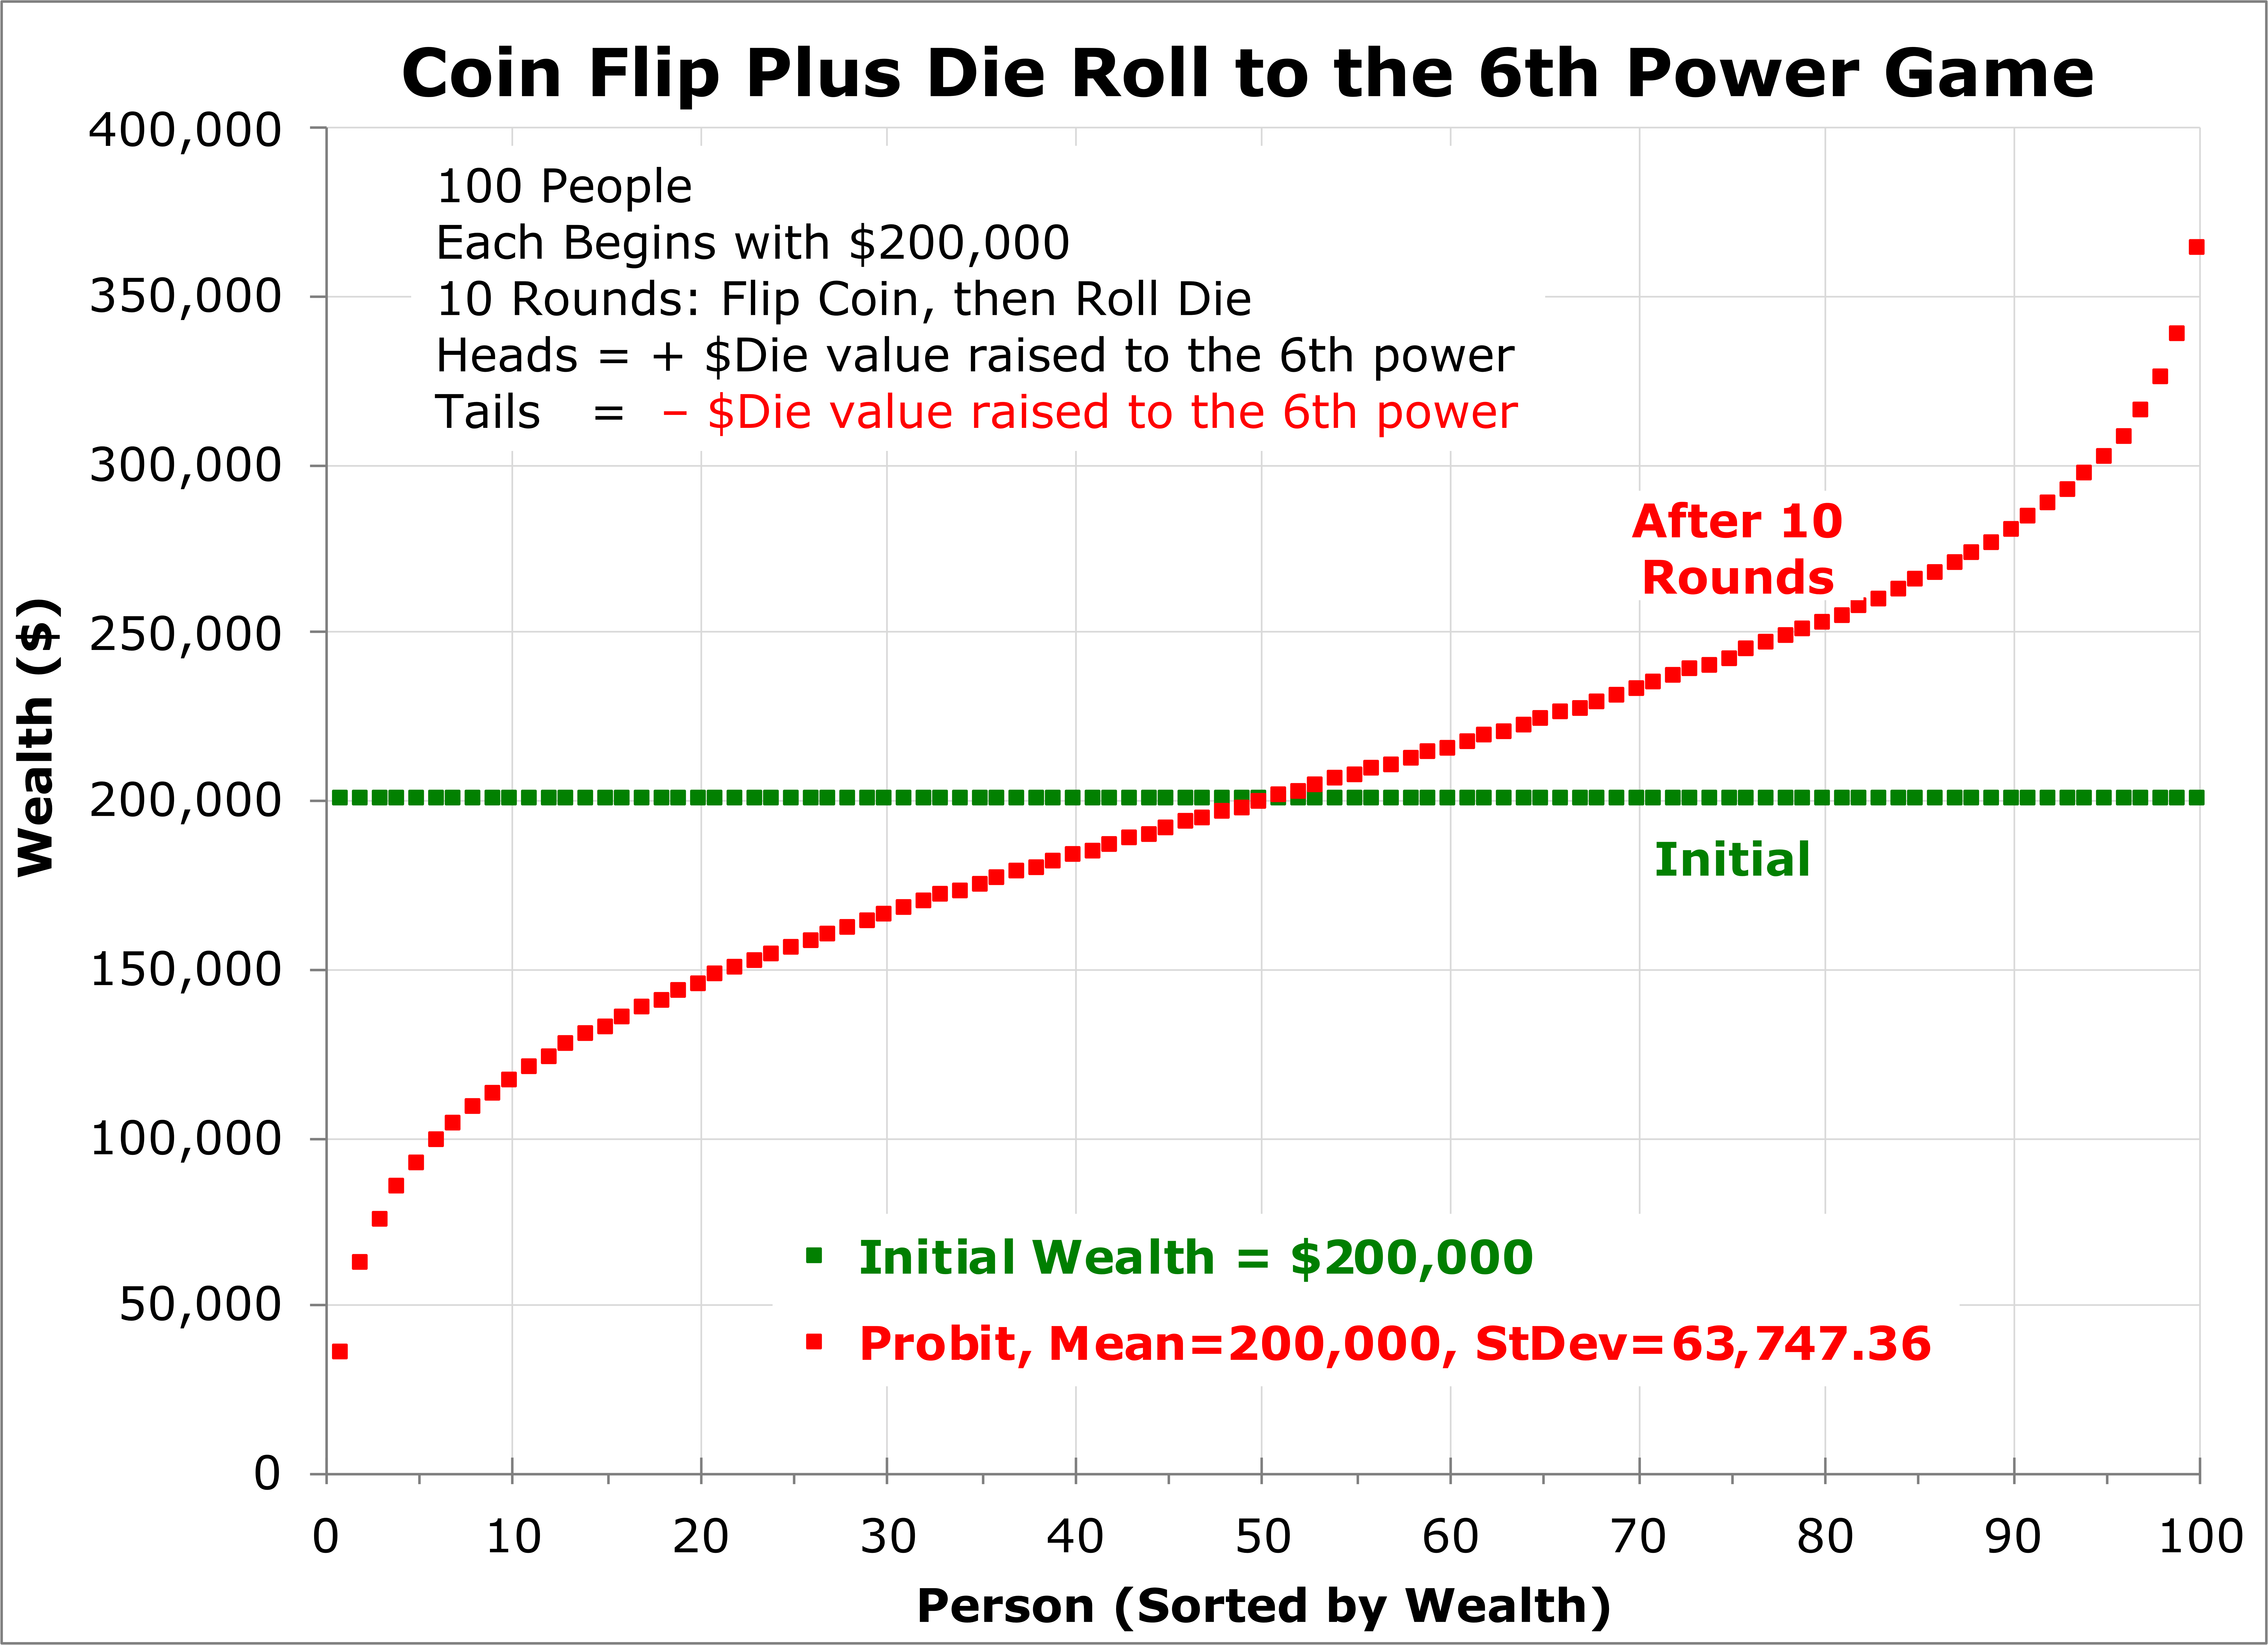 Wealth Distribution of Coin Flip Plus Die Roll Raised to the Sixth Power after 10 rounds.